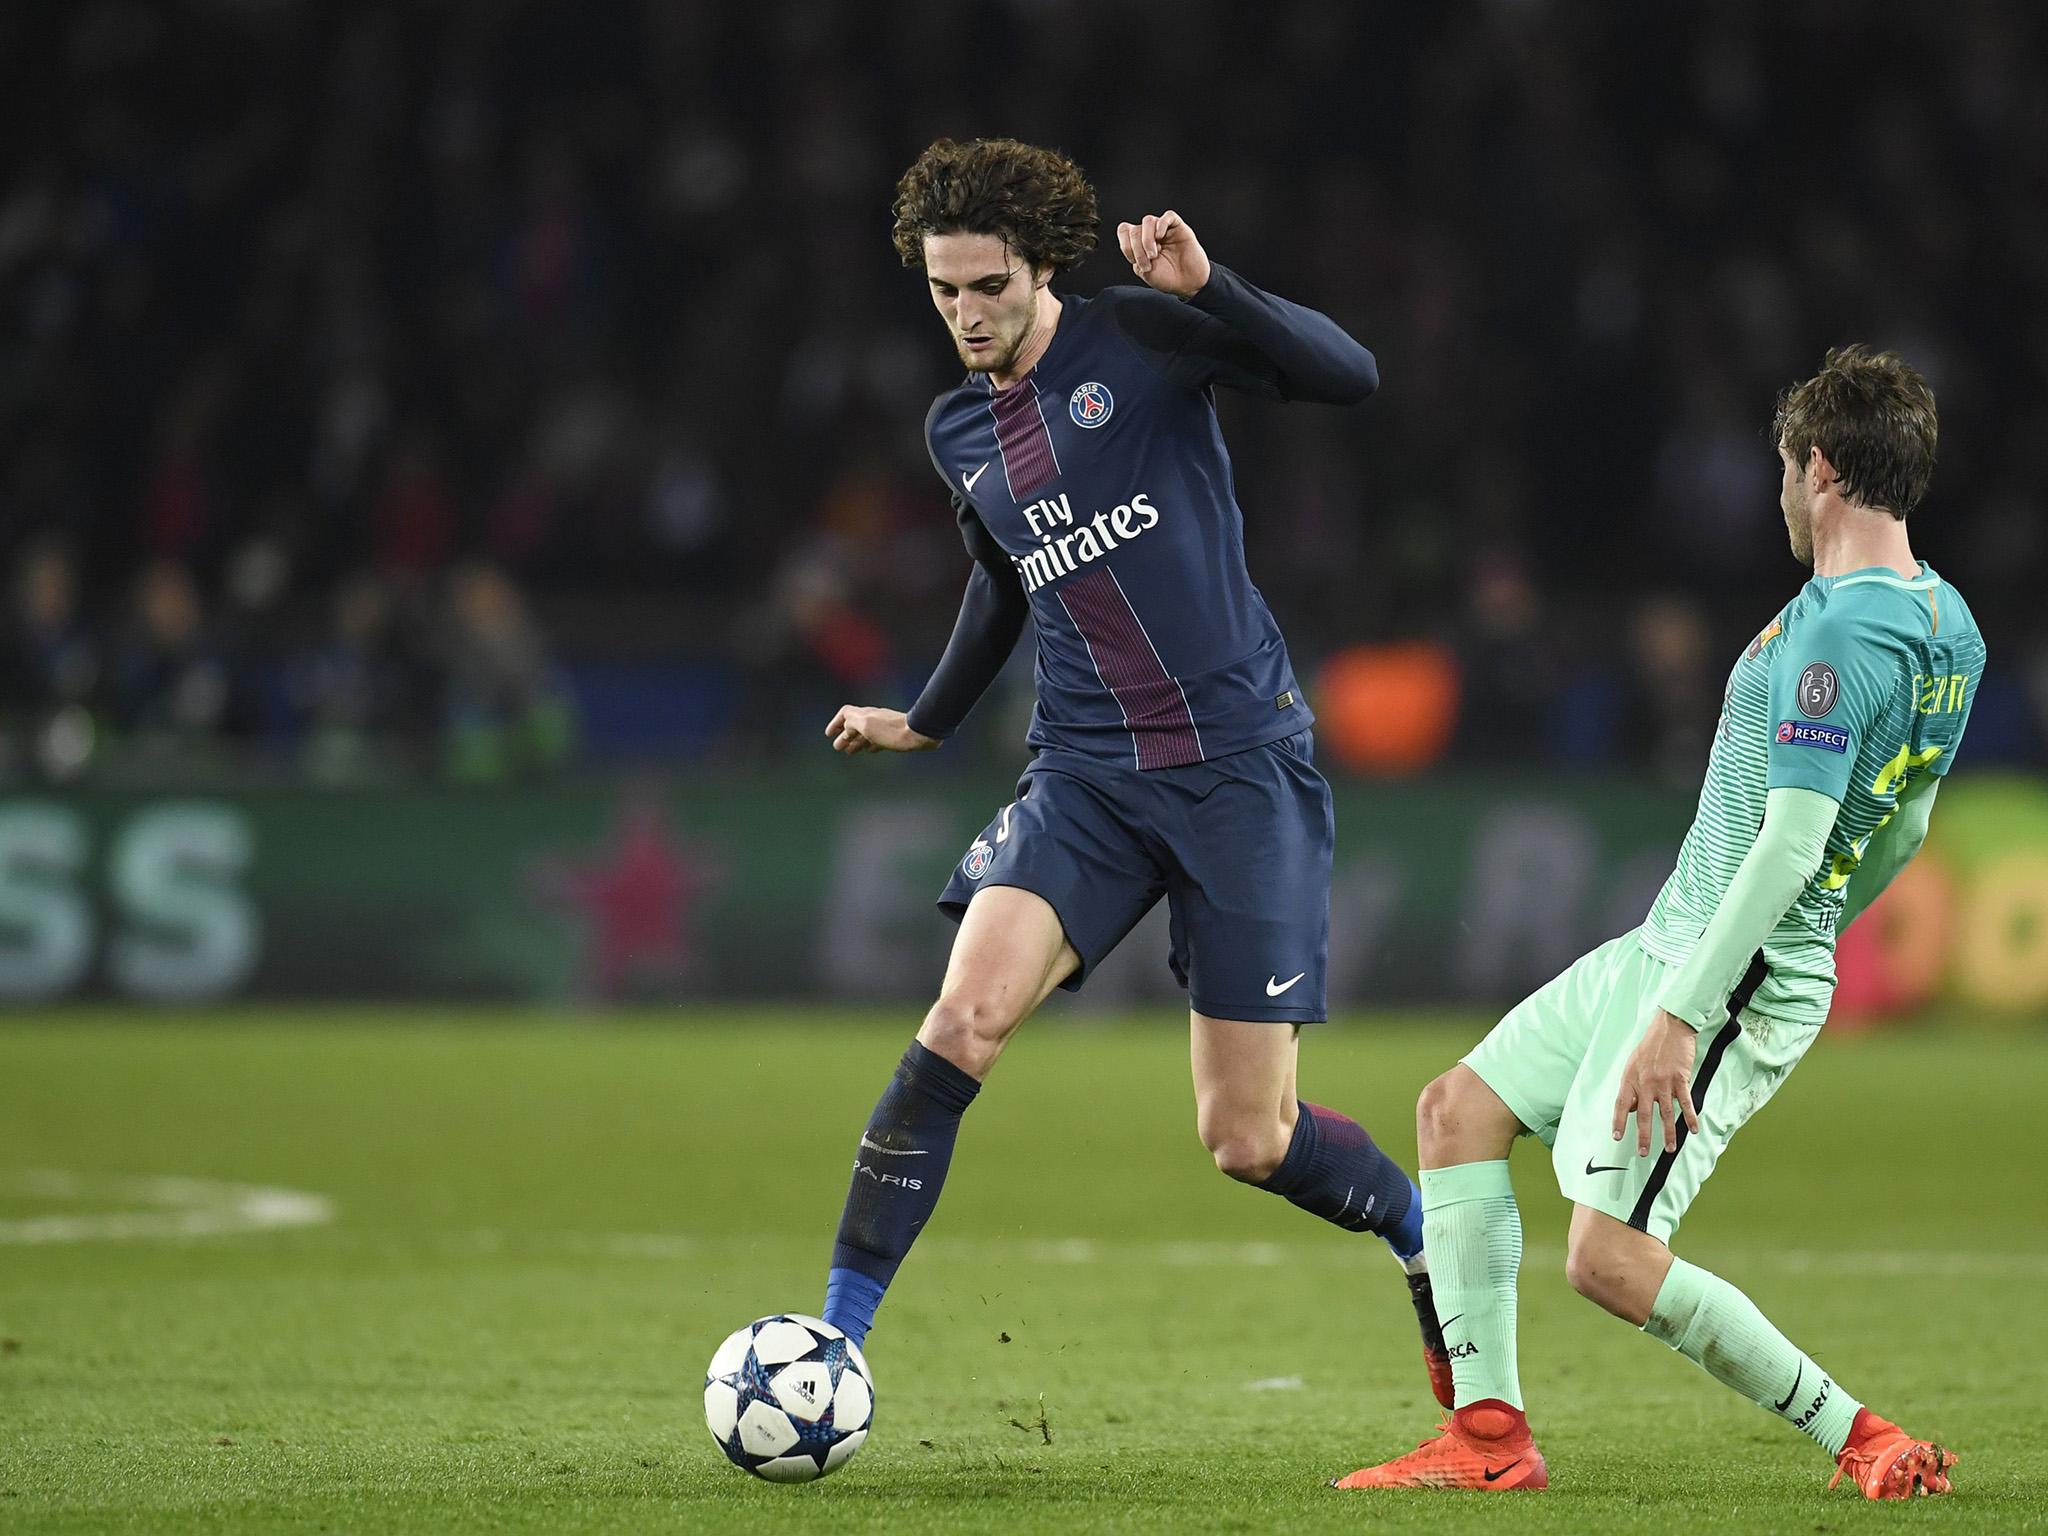 PSG dominated in midfield and Adrien Rabiot was at the heart of it